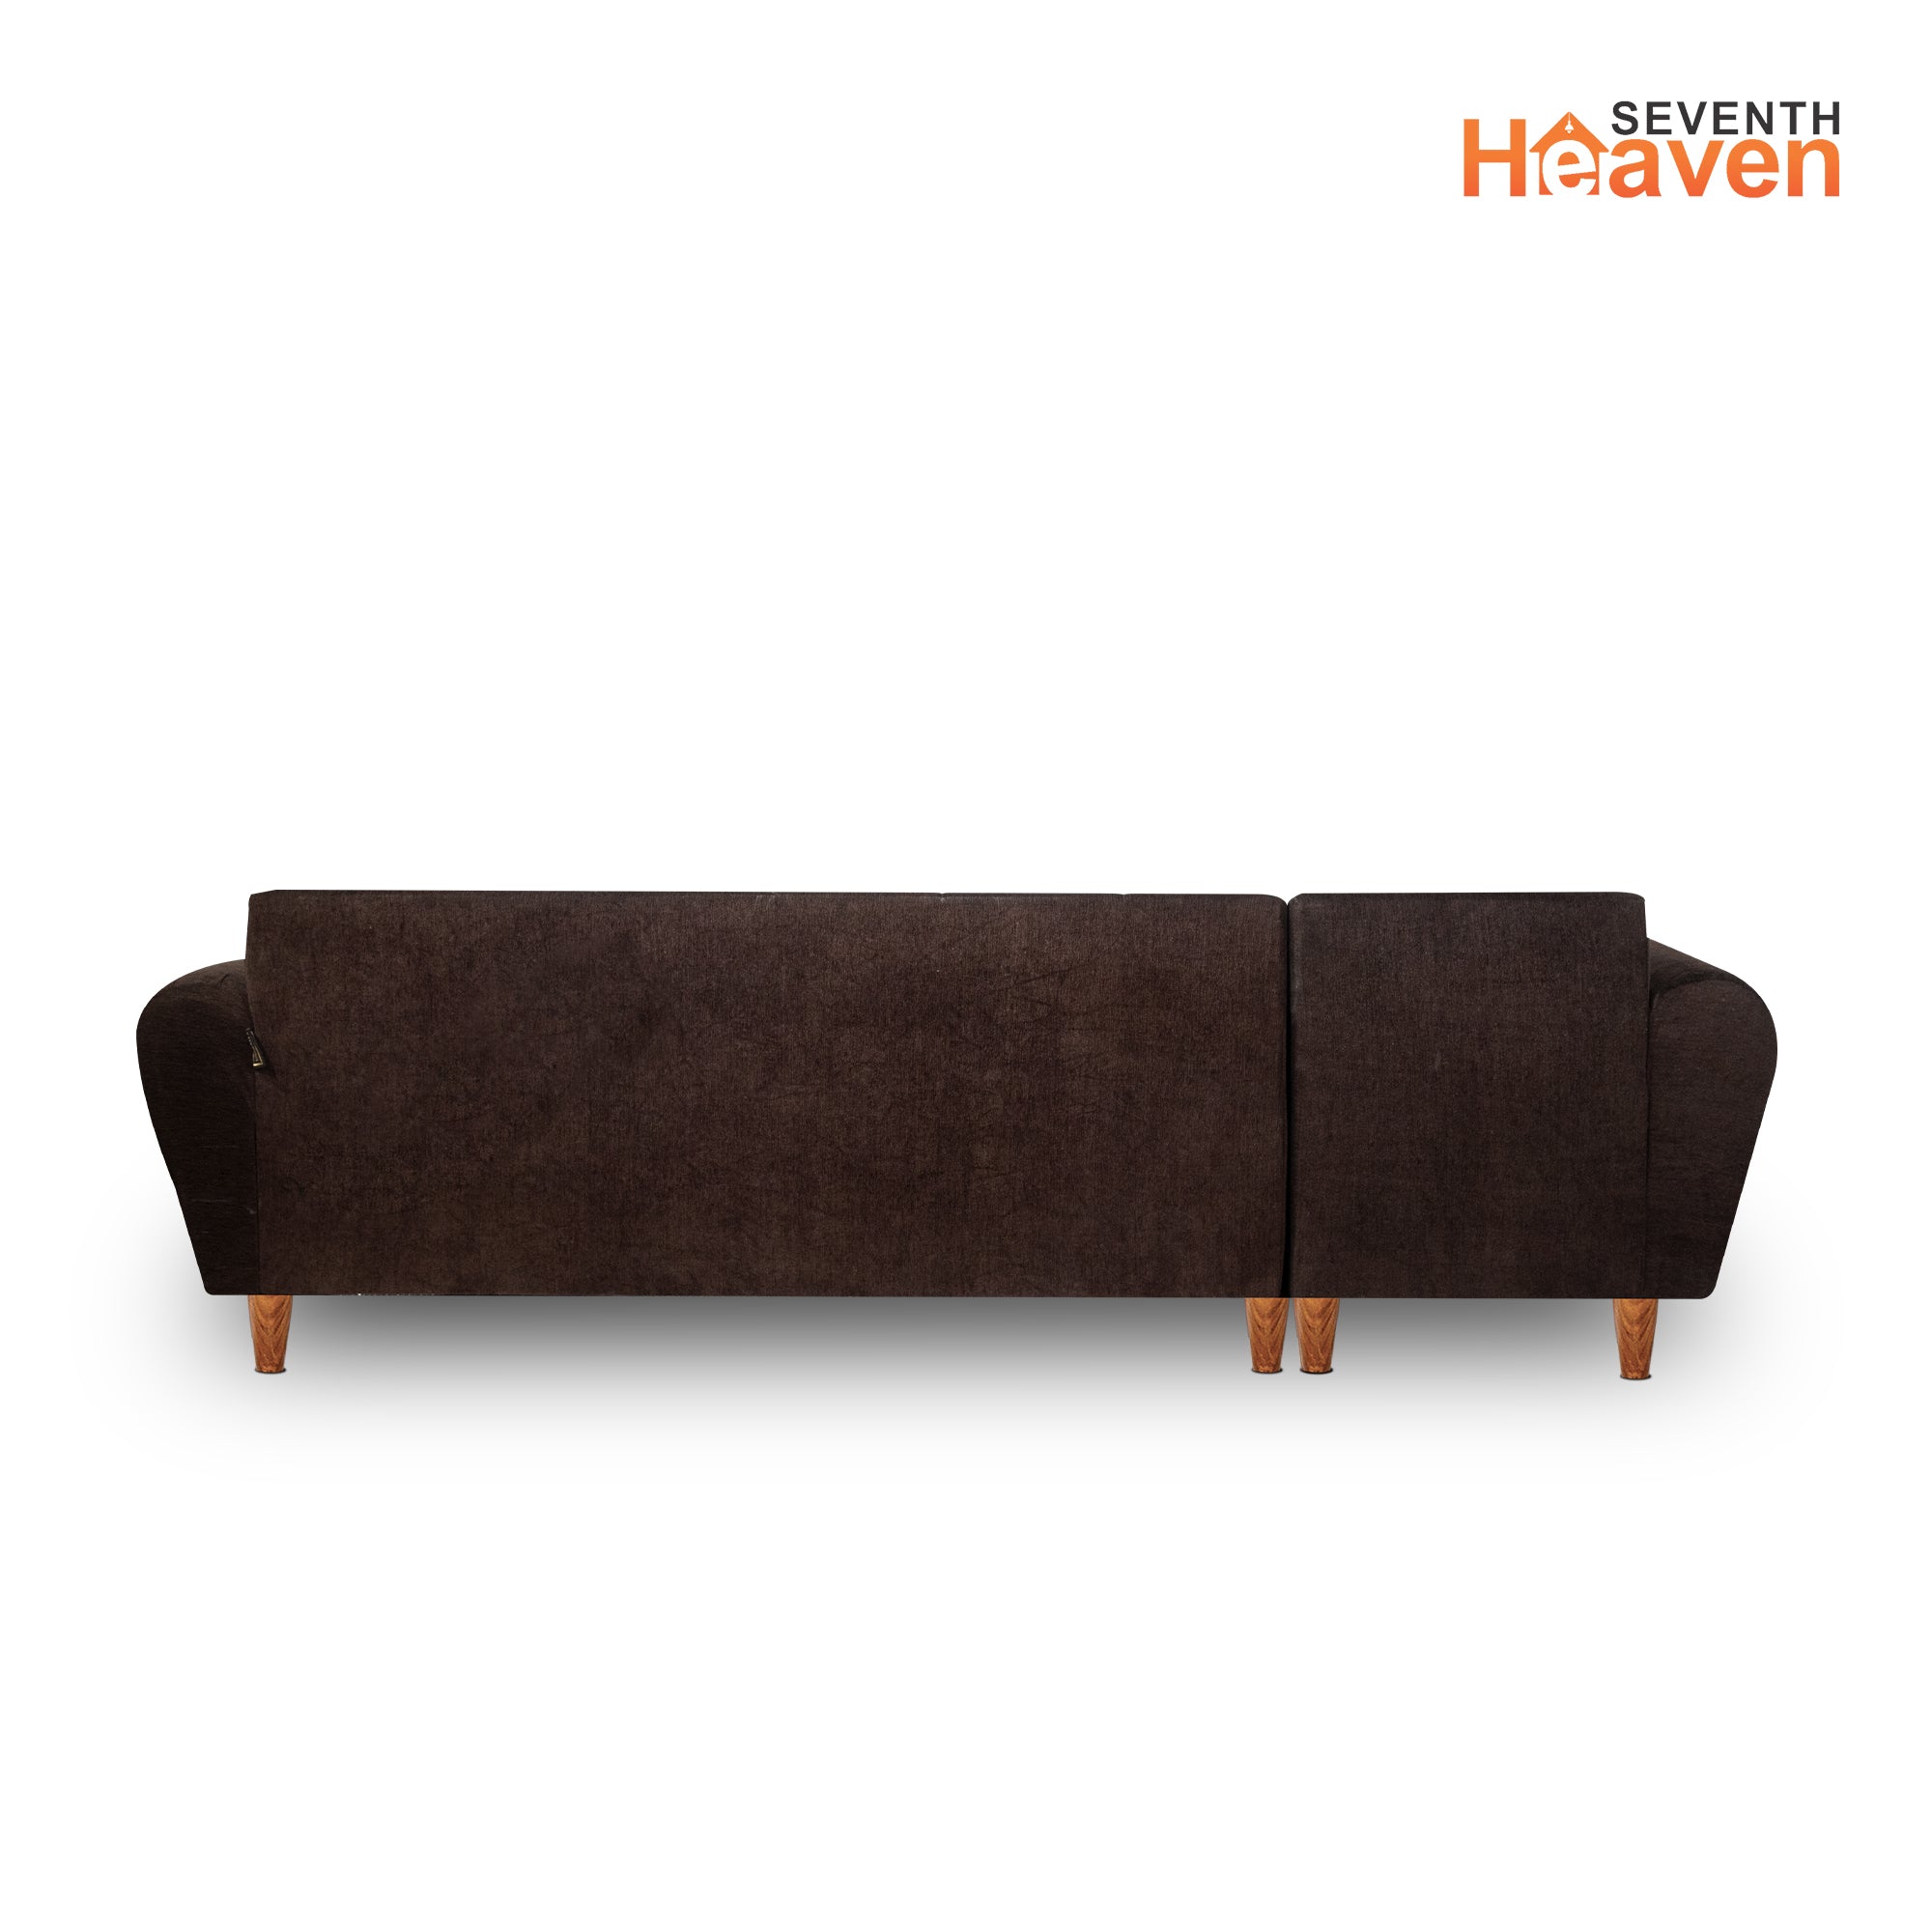 Seventh Heaven Milan 6 Seater Sofa, Extra Spacious, Chenille Molfino Fabric: 3 Year Warranty Fabric 6 Seater Sofa  (Finish Color - Brown, DIY(Do-It-Yourself))